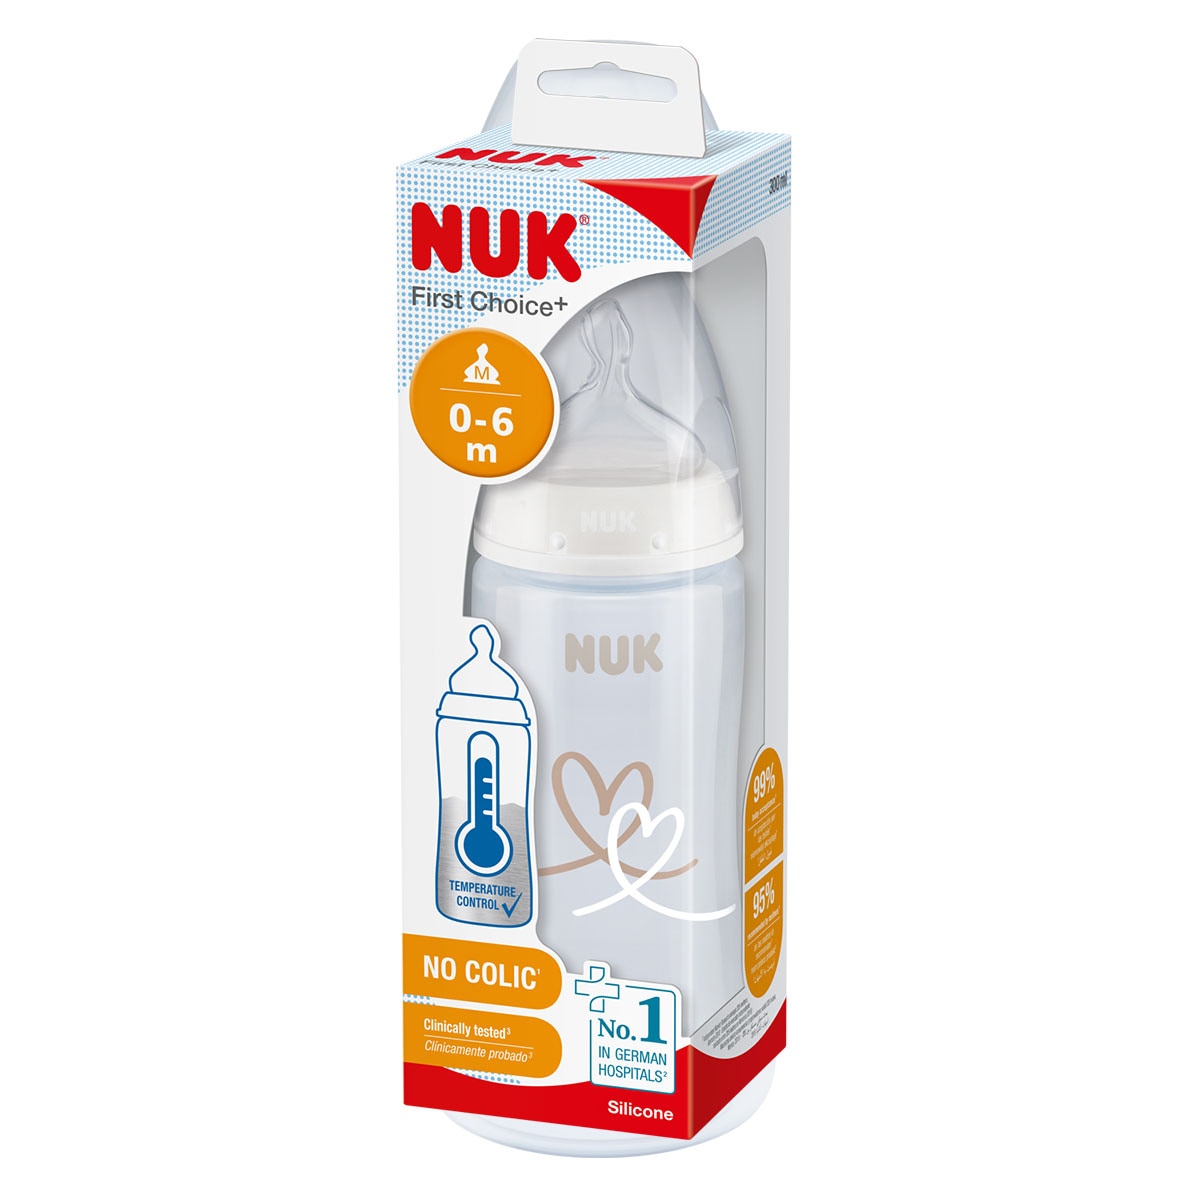 NUK First Choice+ Bottle with Temp Control 0-6 Months 300ml